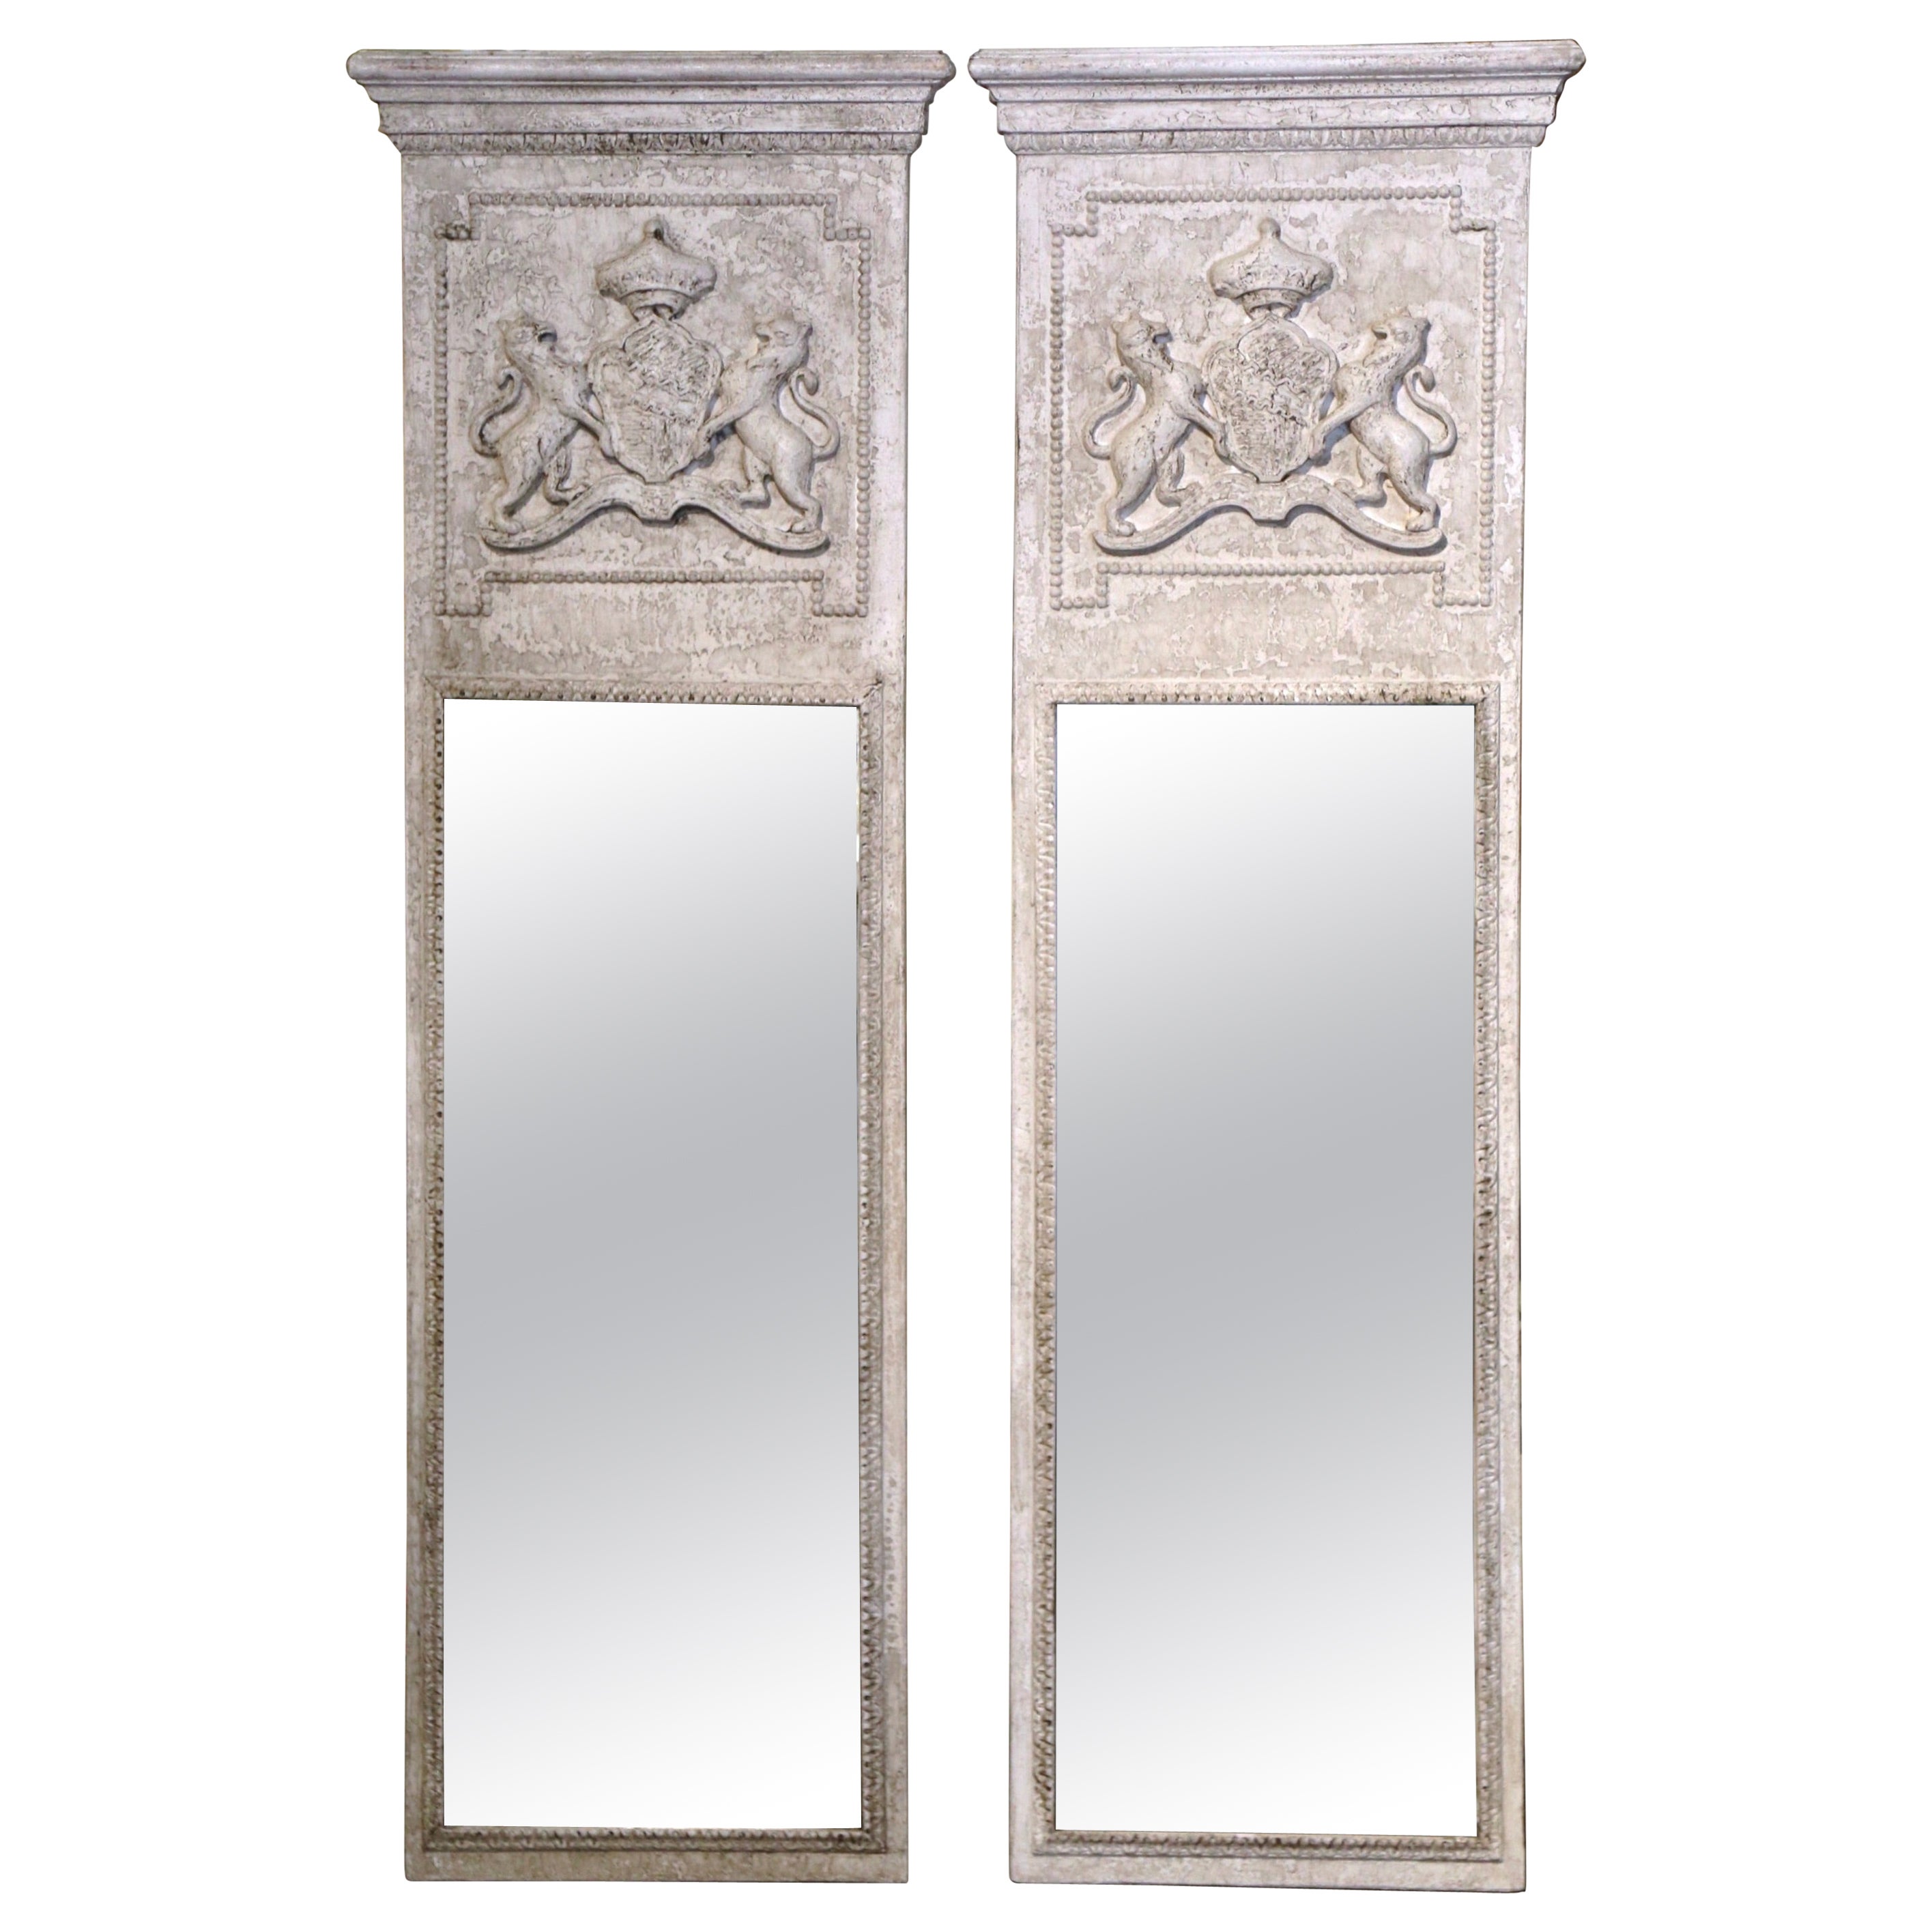 Pair of Mid-Century French Carved and Painted Trumeaux Mirrors from Normandy